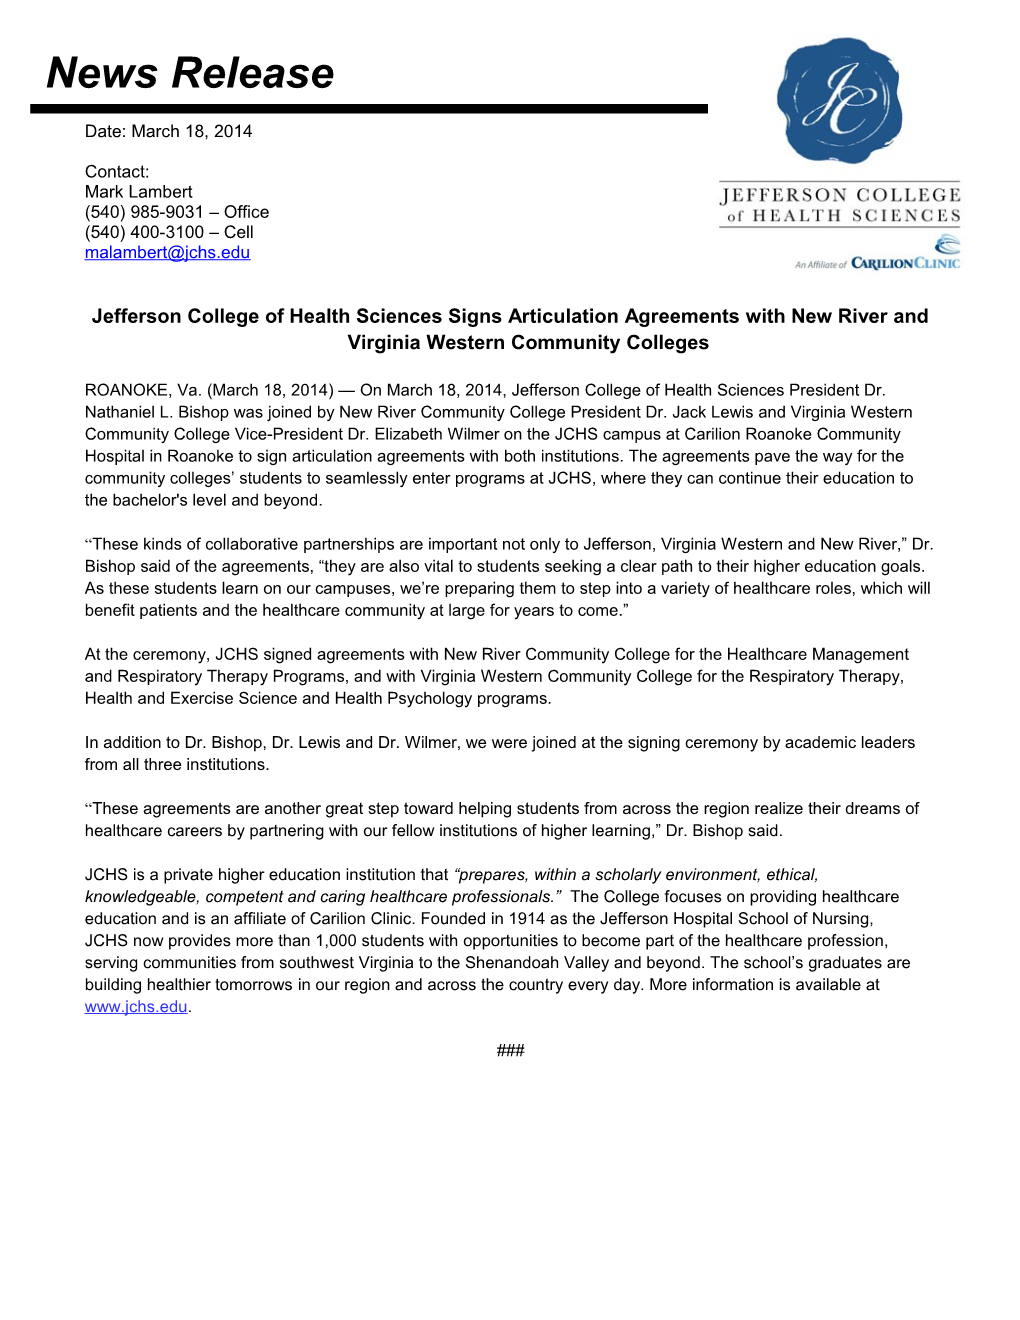 Jefferson College of Health Sciences Signs Articulation Agreements with New River and Virginia